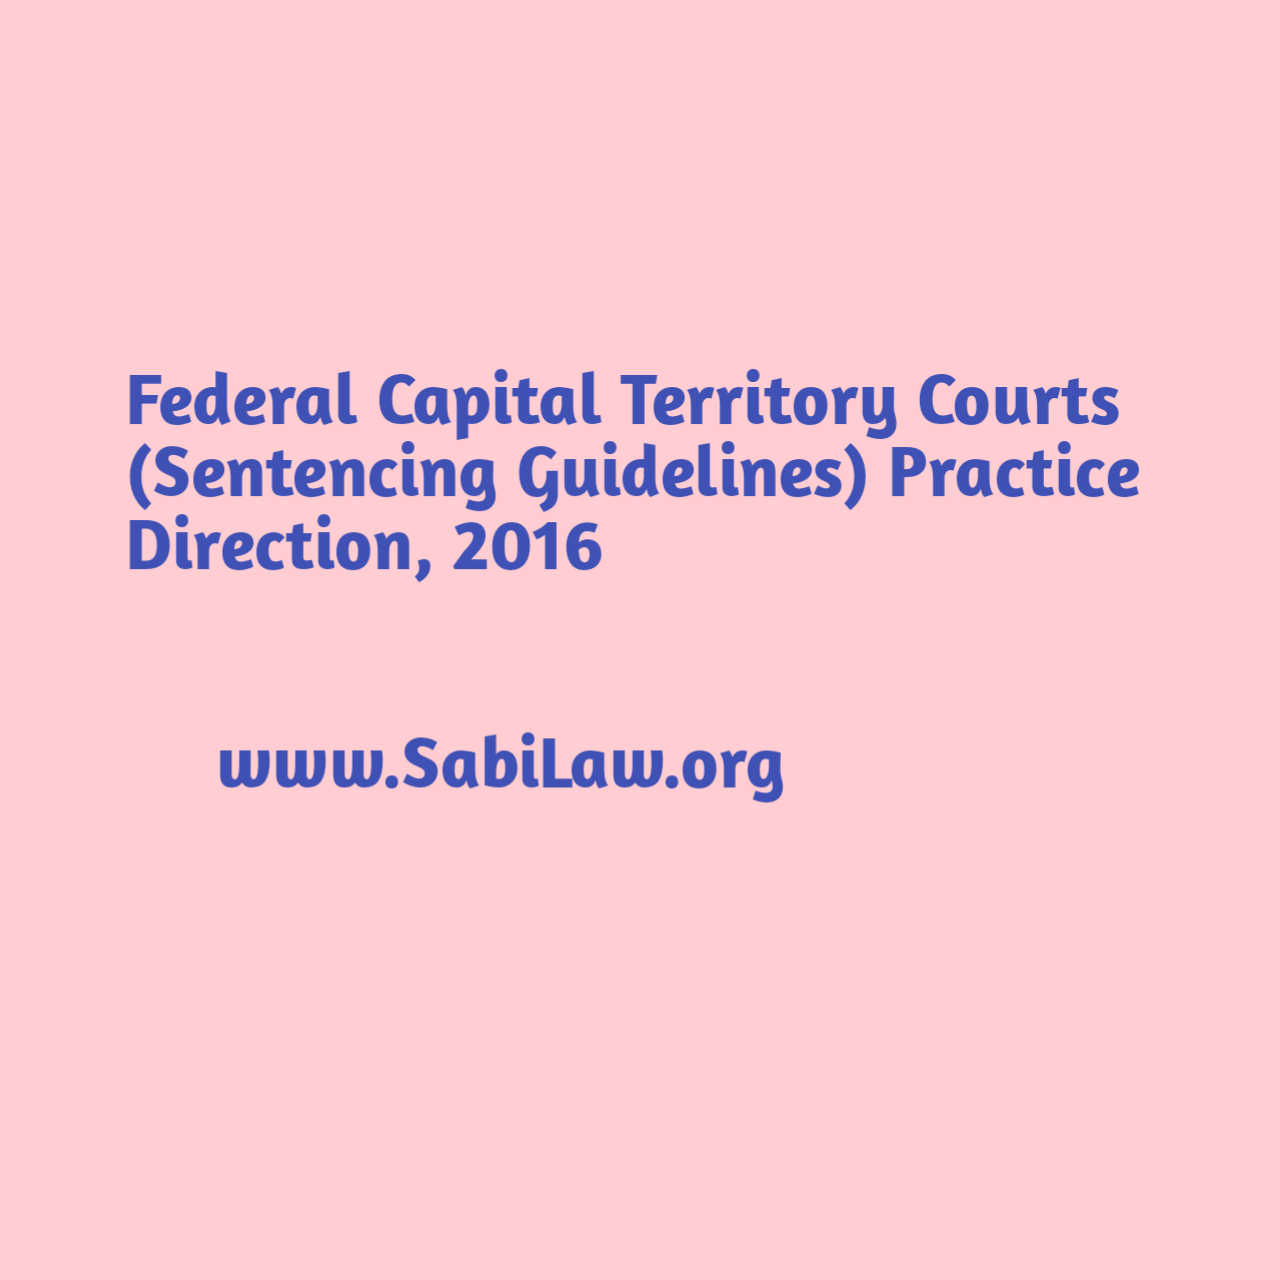 Federal Capital Territory Courts (Sentencing Guidelines) Practice Direction, 2016